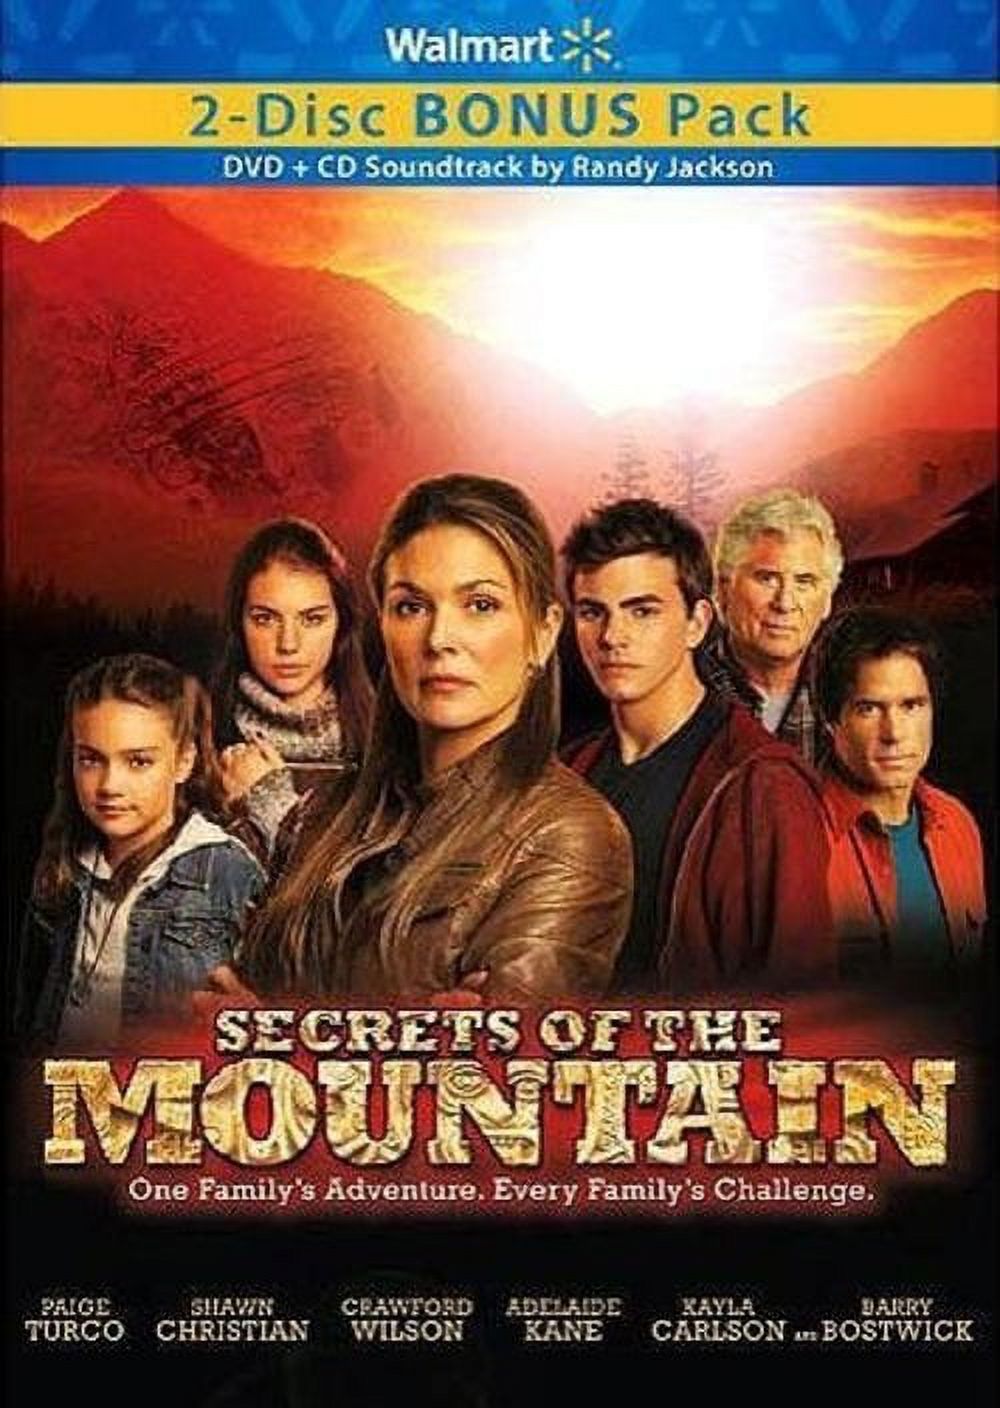 Secrets Of The Mountain Widescreen Walmart Exclusive (DVD) - image 1 of 3